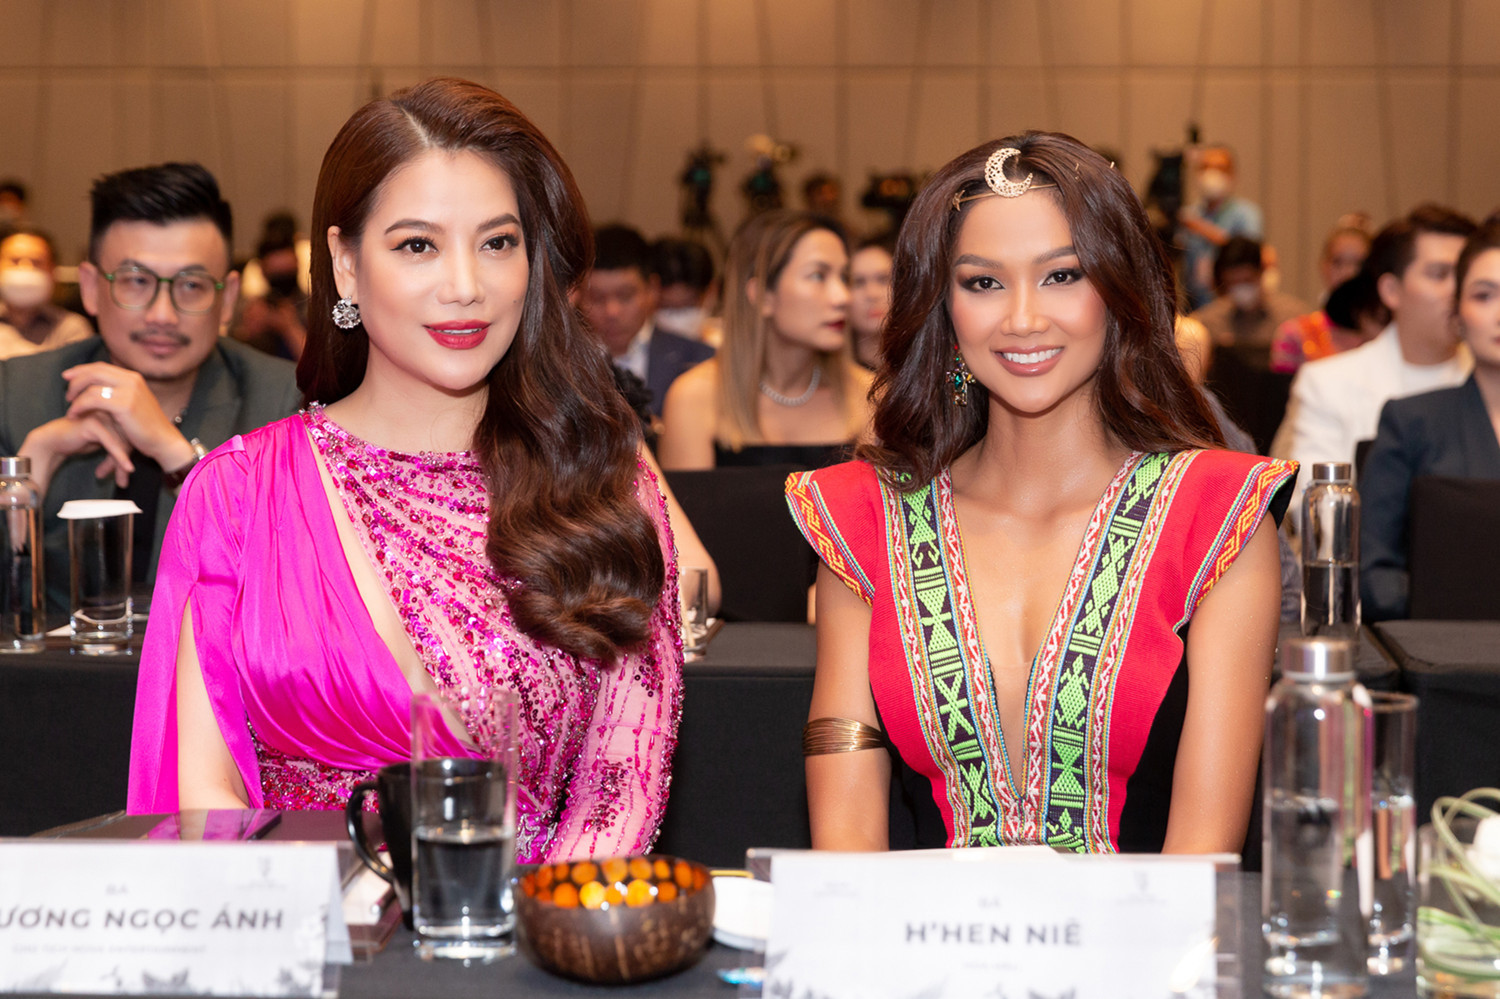 H'Hen Niê is sexy and beautiful with Truong Ngoc Anh